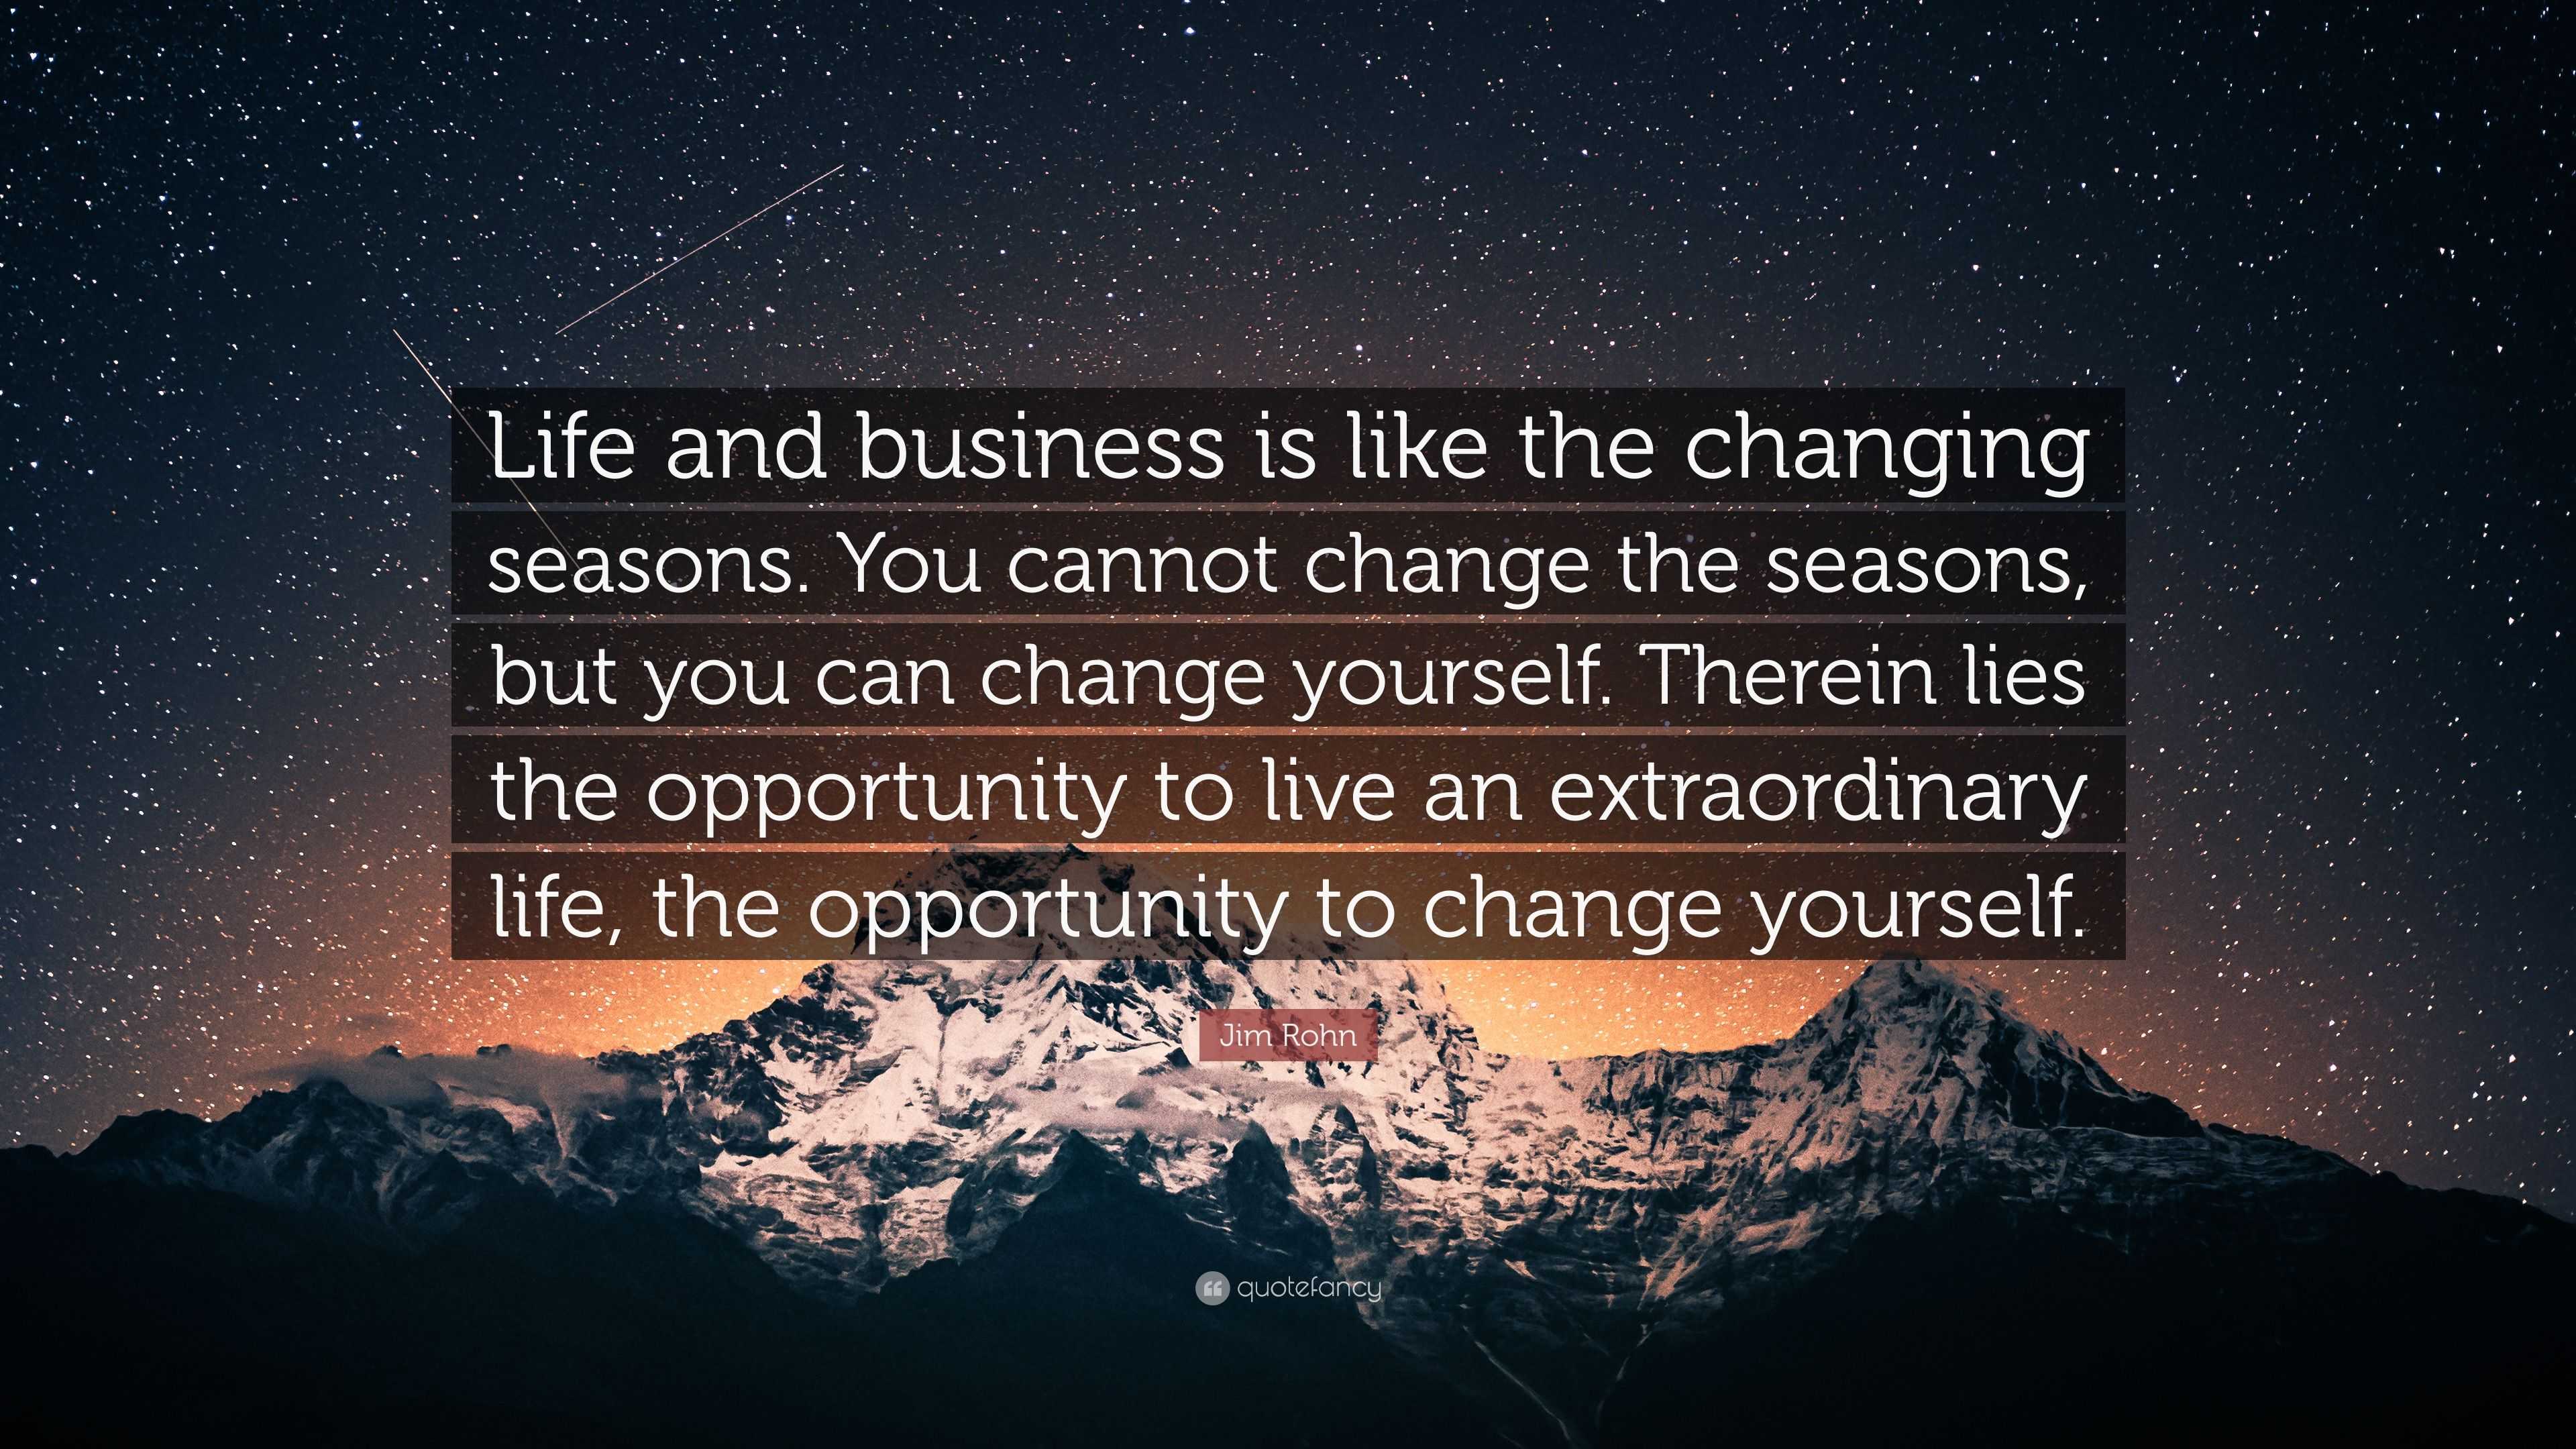 Jim Rohn Quote: “Life and business is like the changing seasons. You